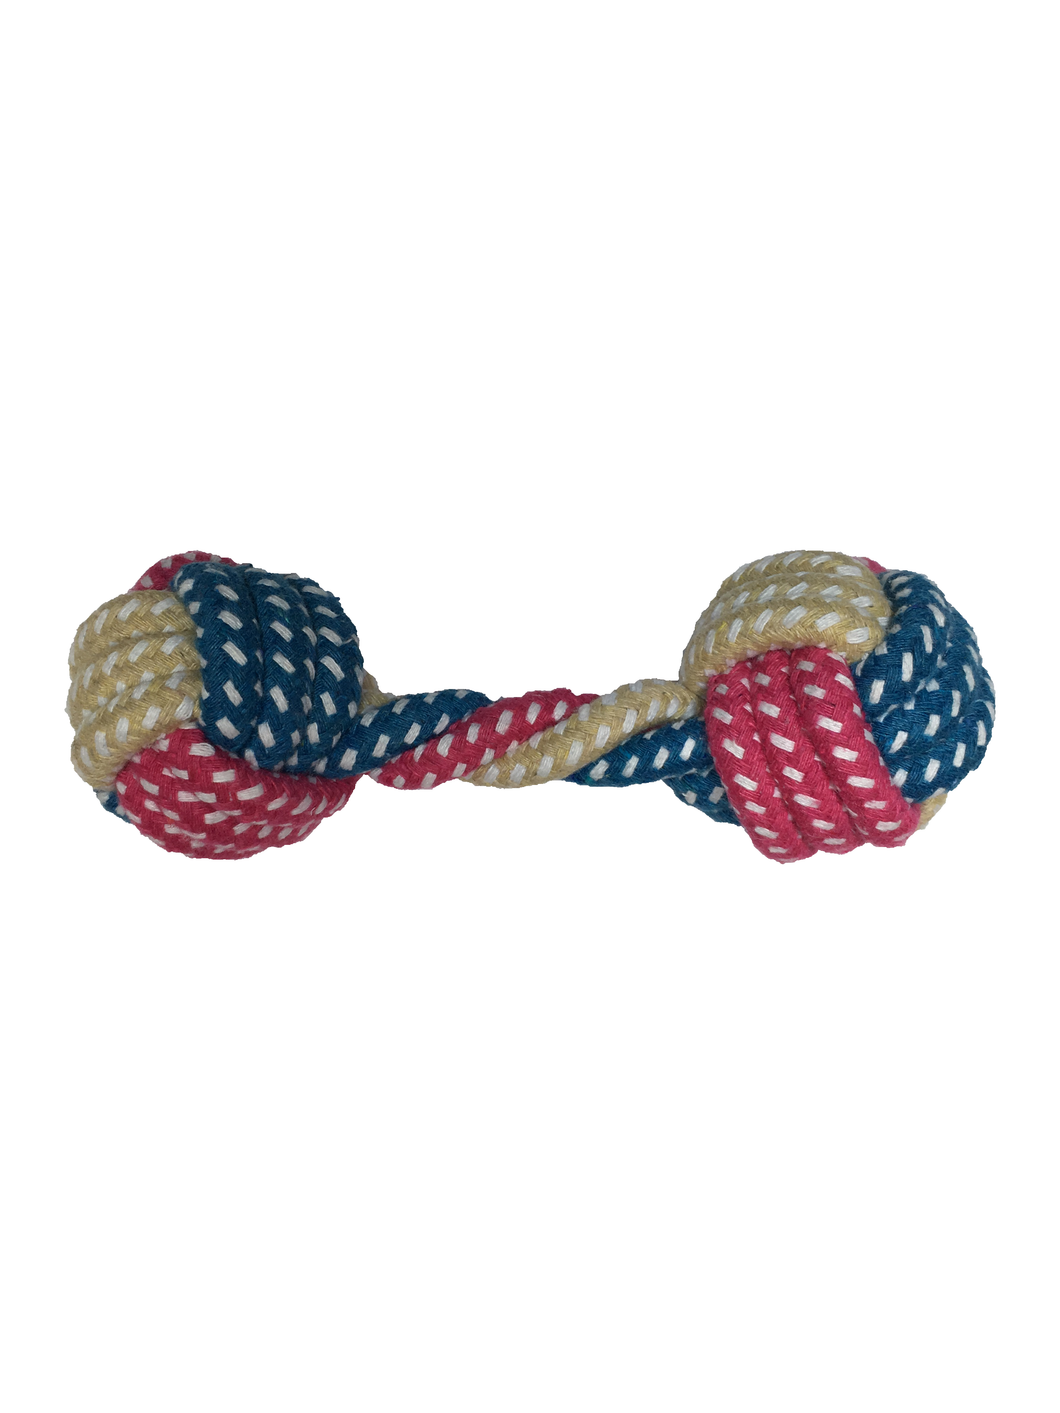 Dumbbell Cotton Rope S/M/L Dogs